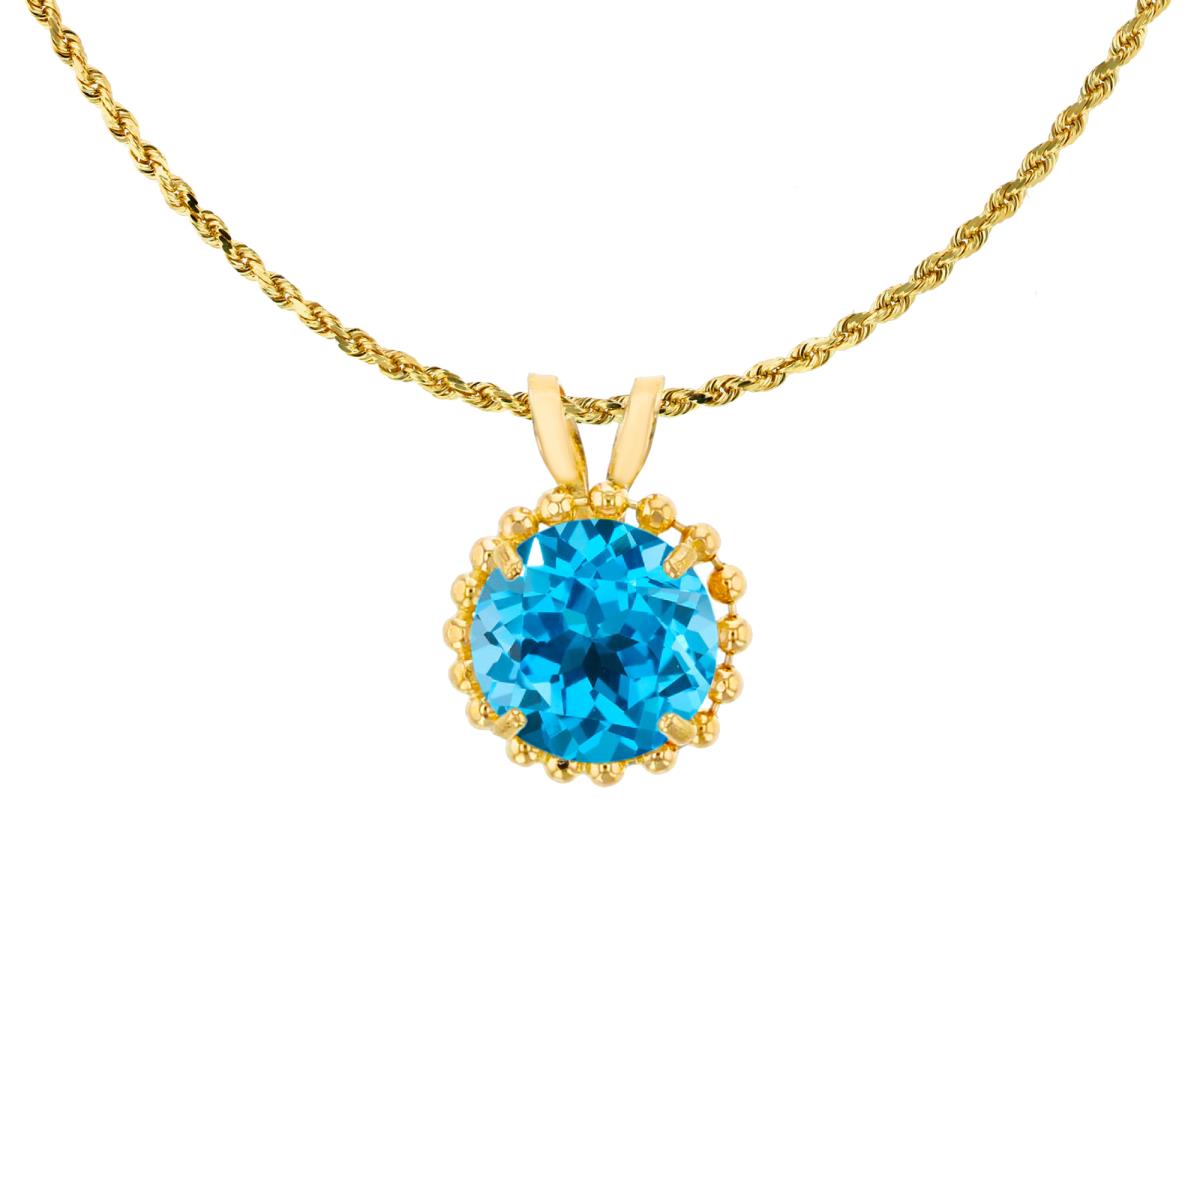 14K Yellow Gold 6mm Rd Cut Swiss Blue Topaz with Bead Frame Rabbit Ear 18" Necklace